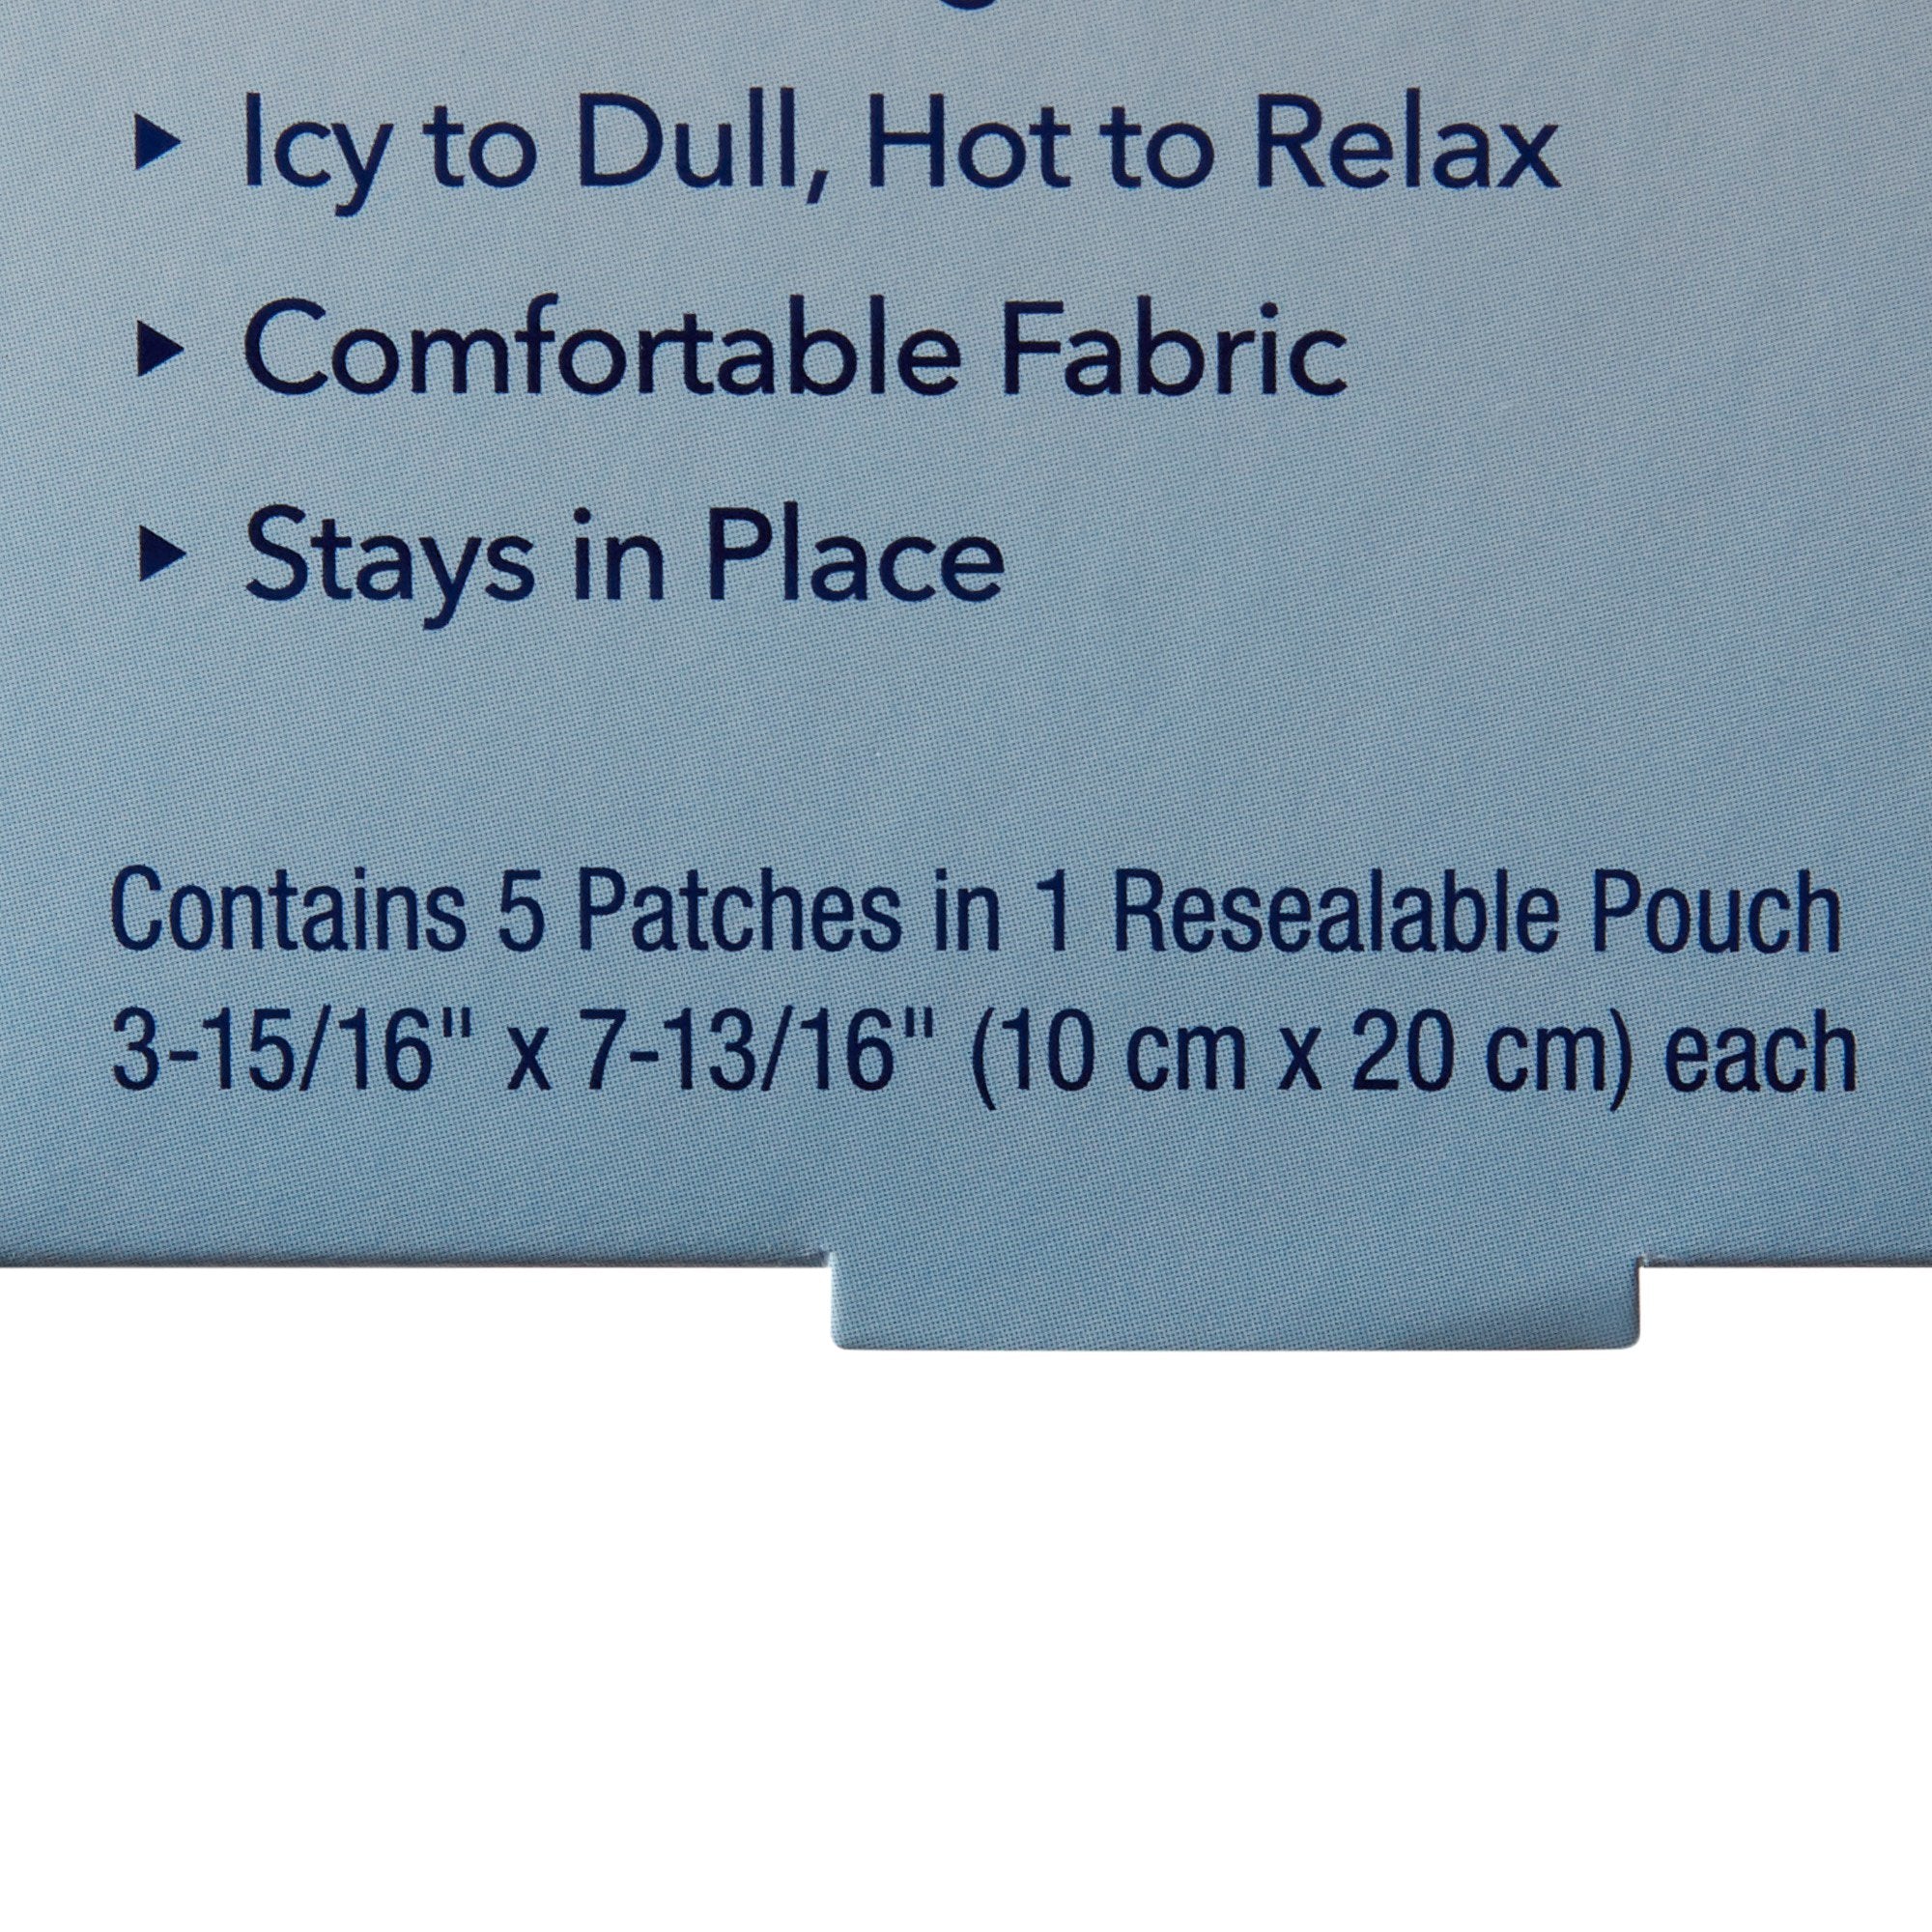 Topical Pain Relief Icy Hot 5% Strength Menthol Patch 5 per Box